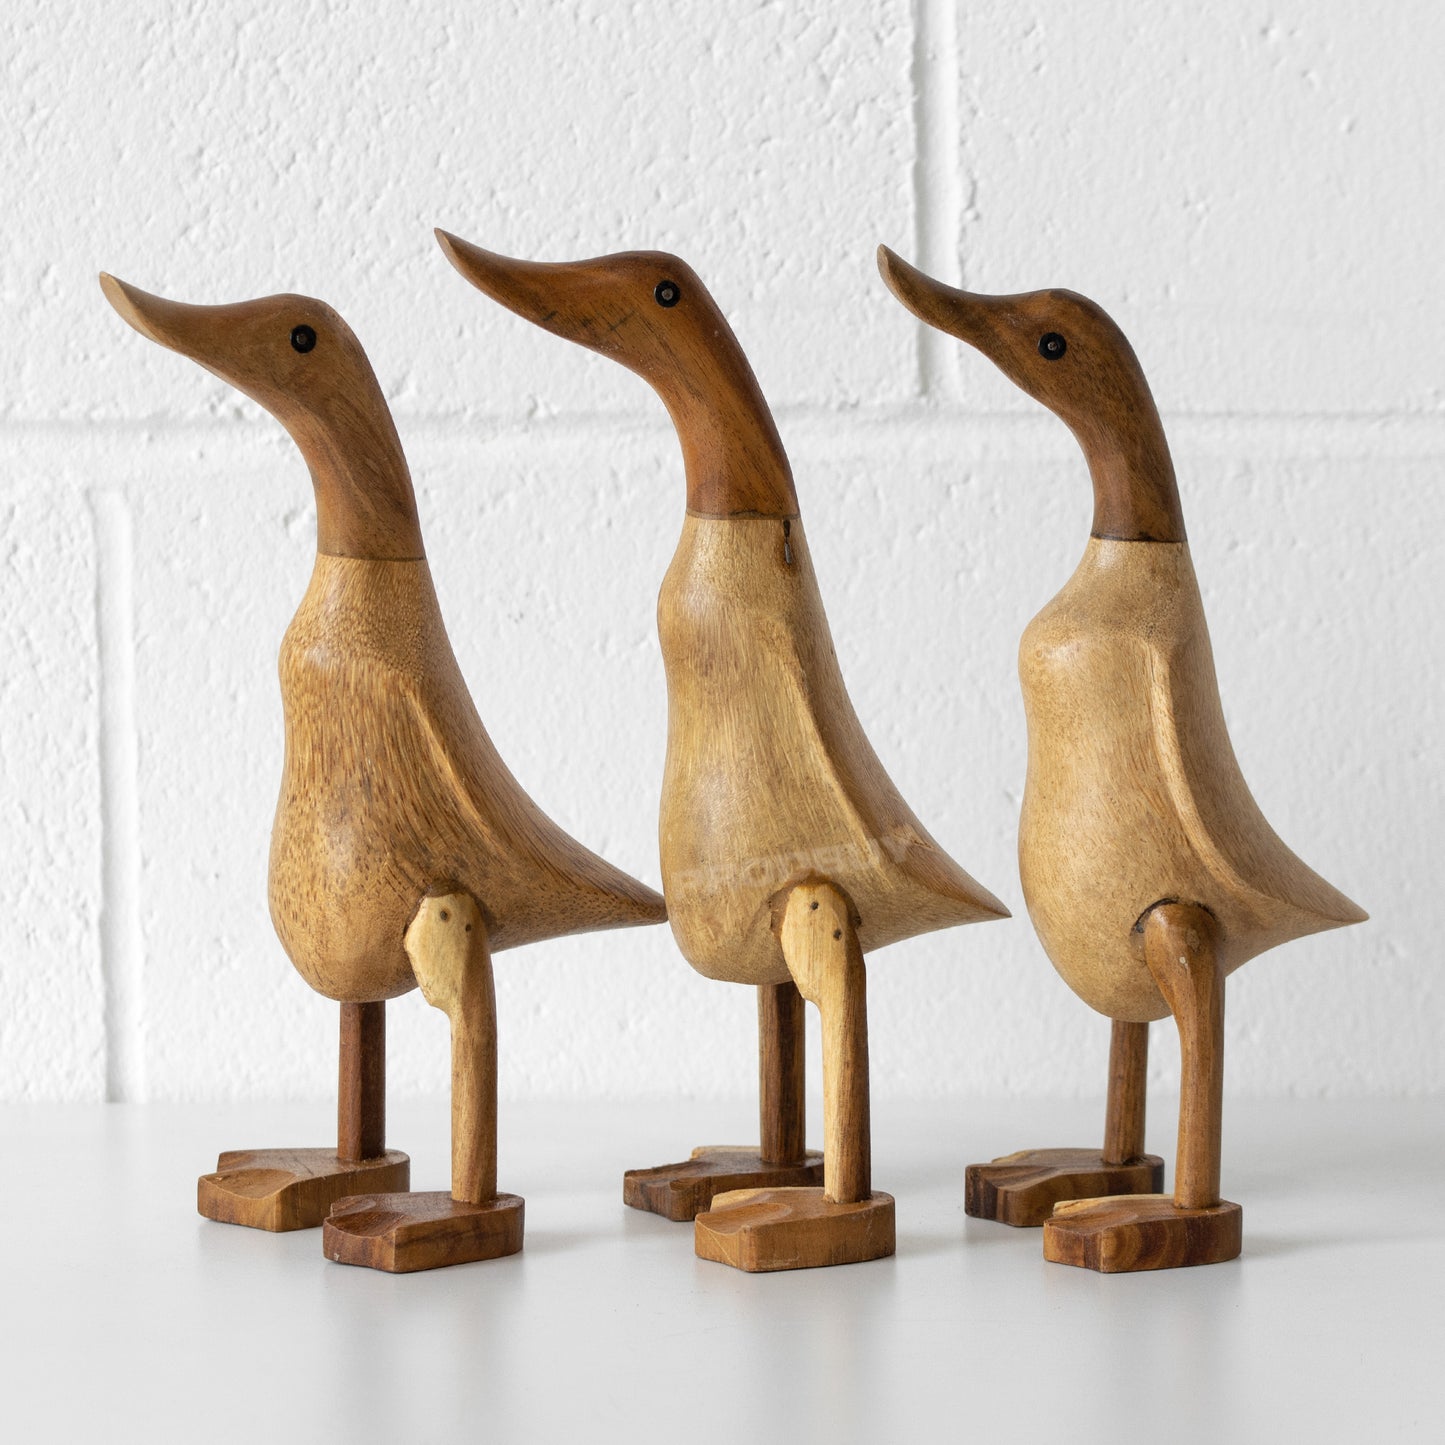 Set of 3 Small Wooden Duck Ornaments